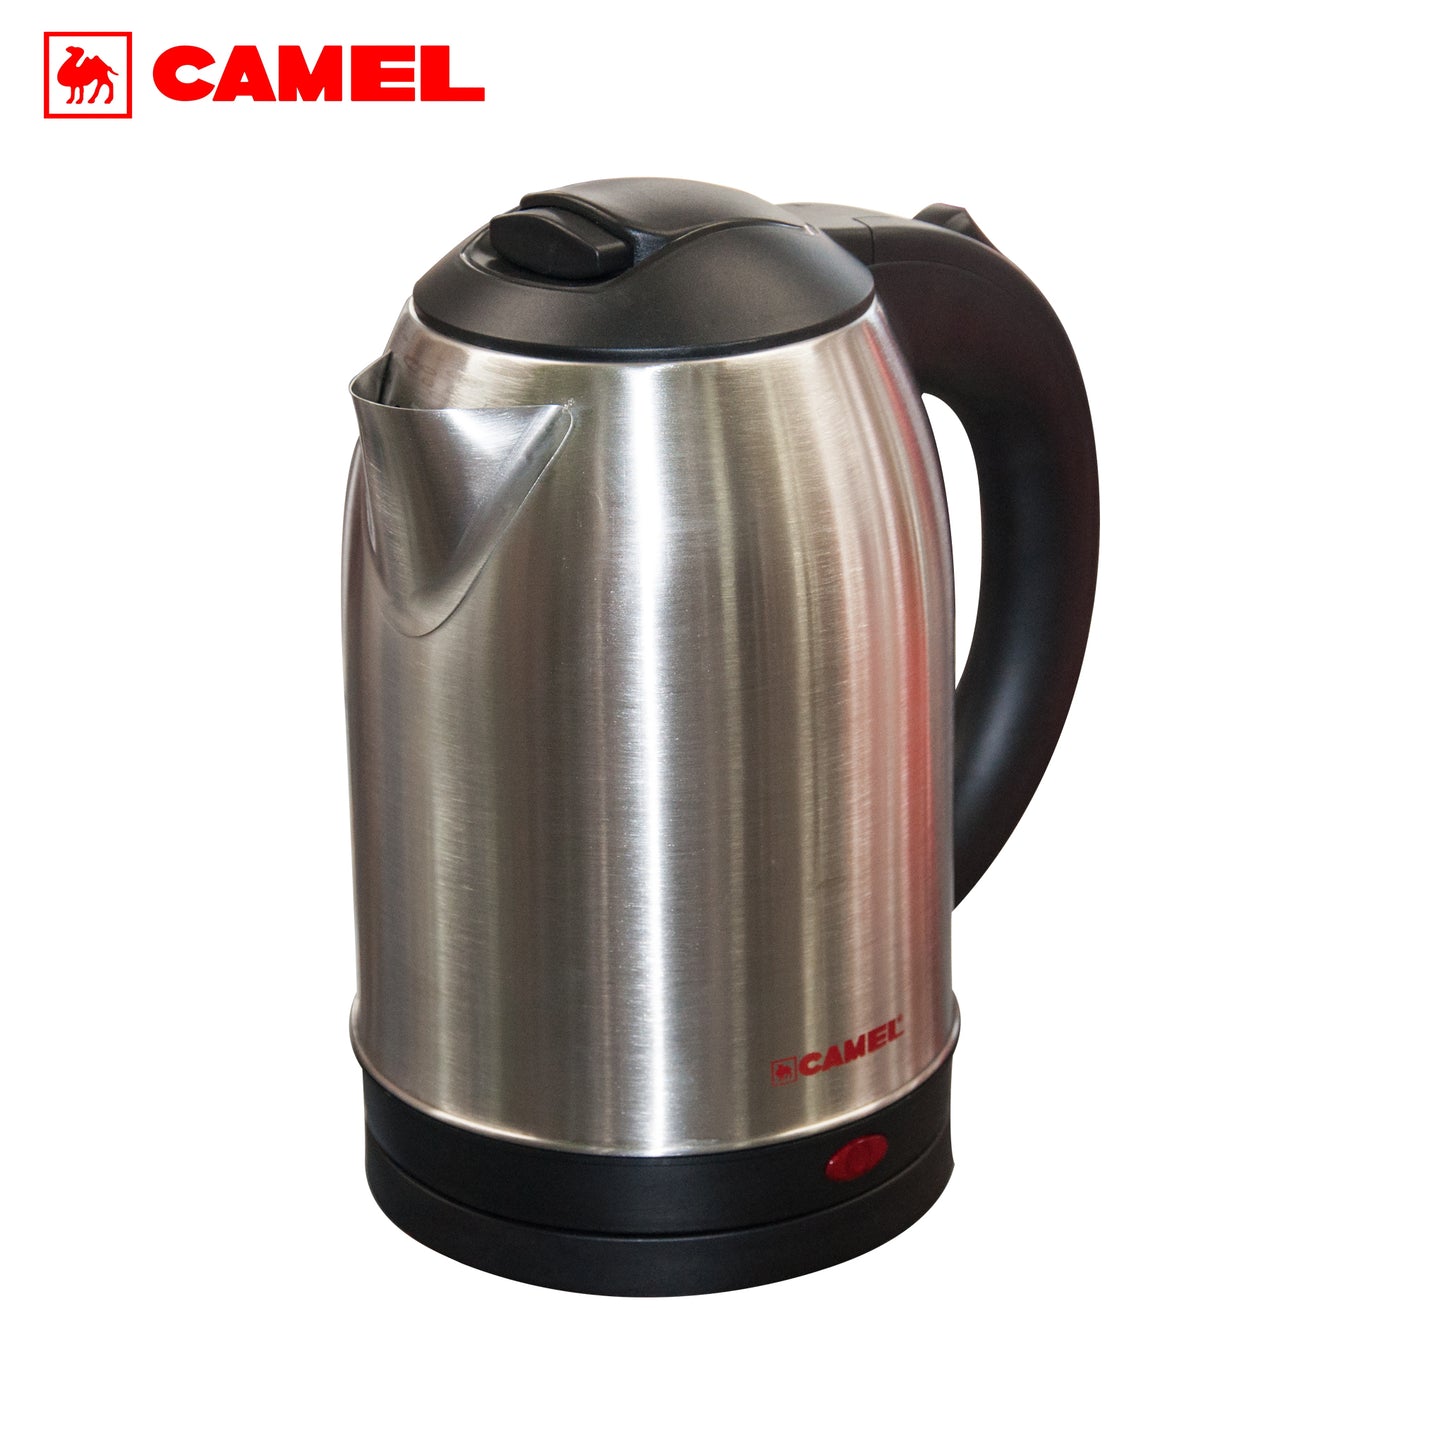 Camel Electric Kettle CK-1830S